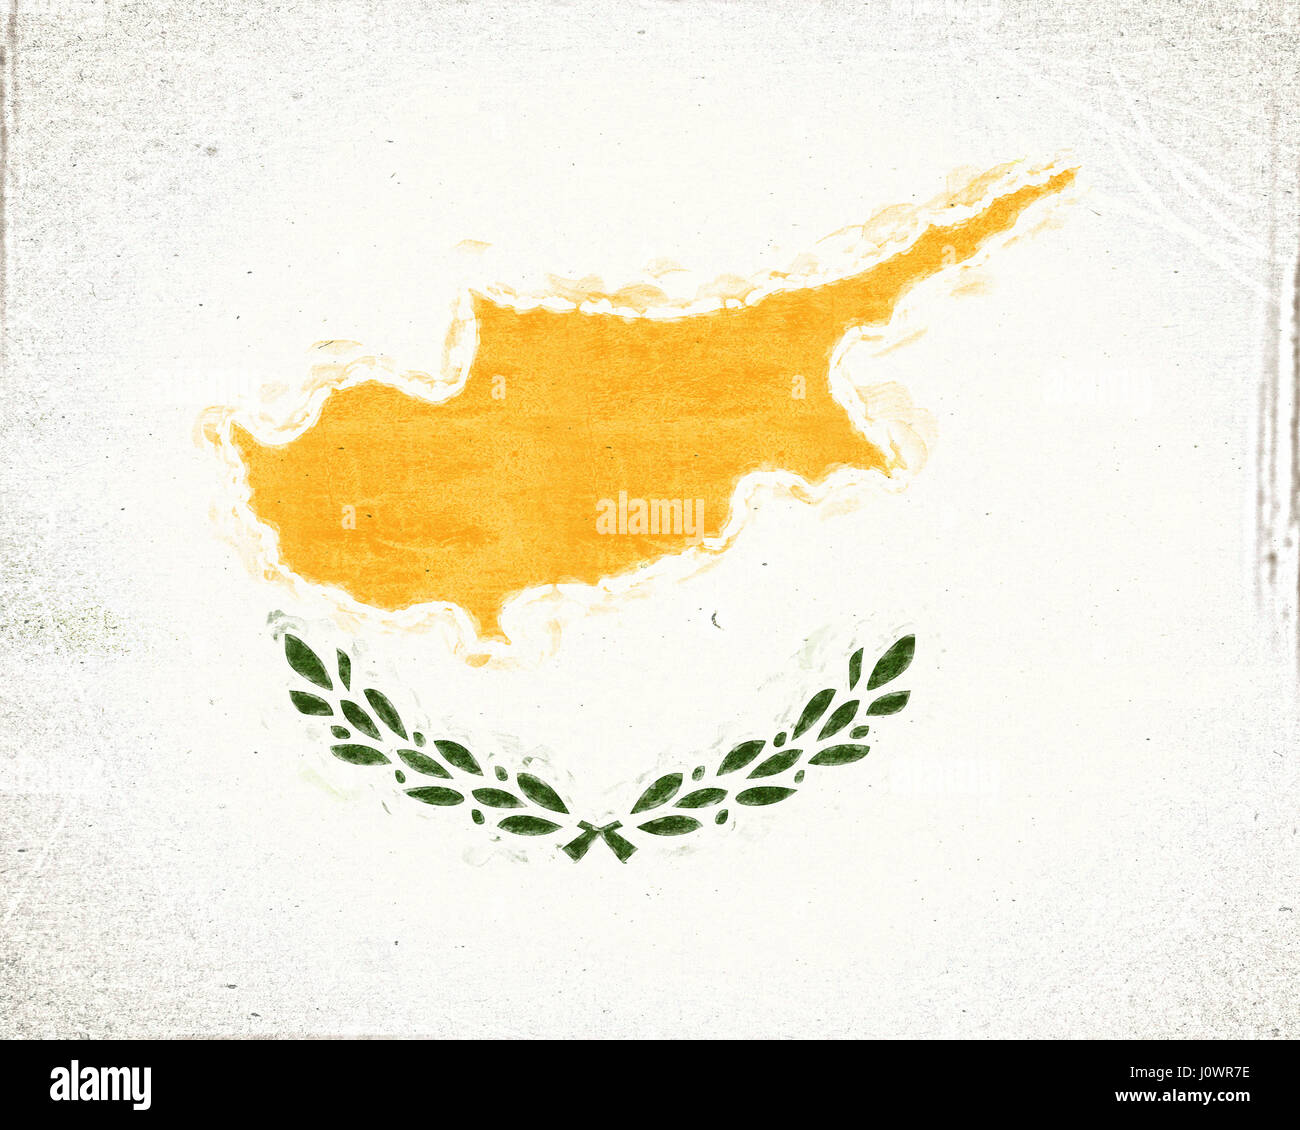 Illustration of the national flag of Cyprus with a grunge effect Stock Photo